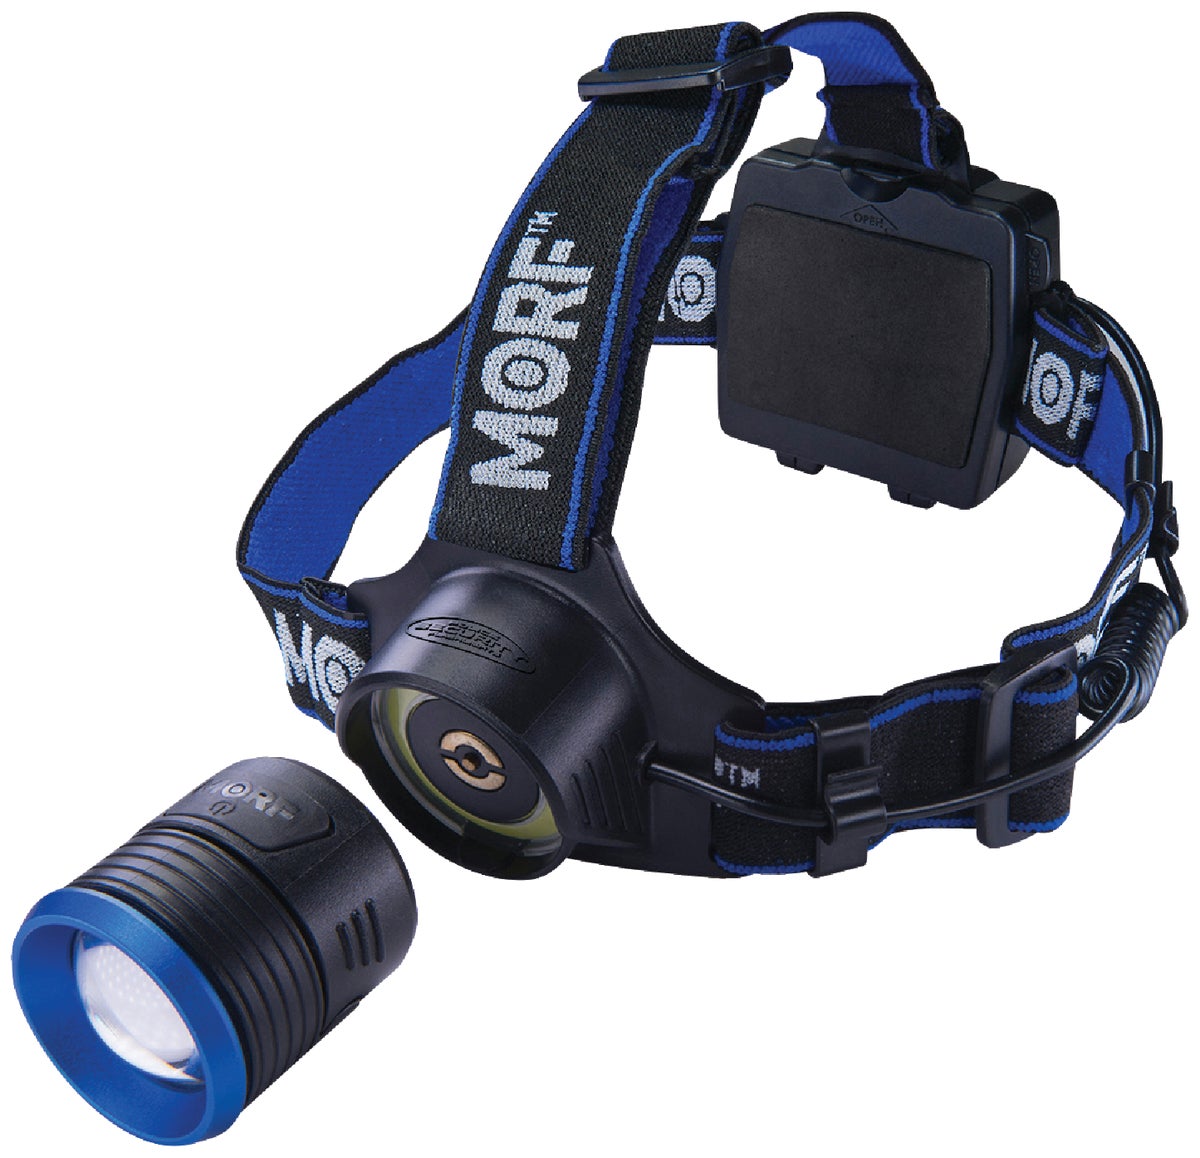 HEADLAMP// RE-chargeable 850 lumens //3modes hi/low/strobe POLICE-SECURITY 